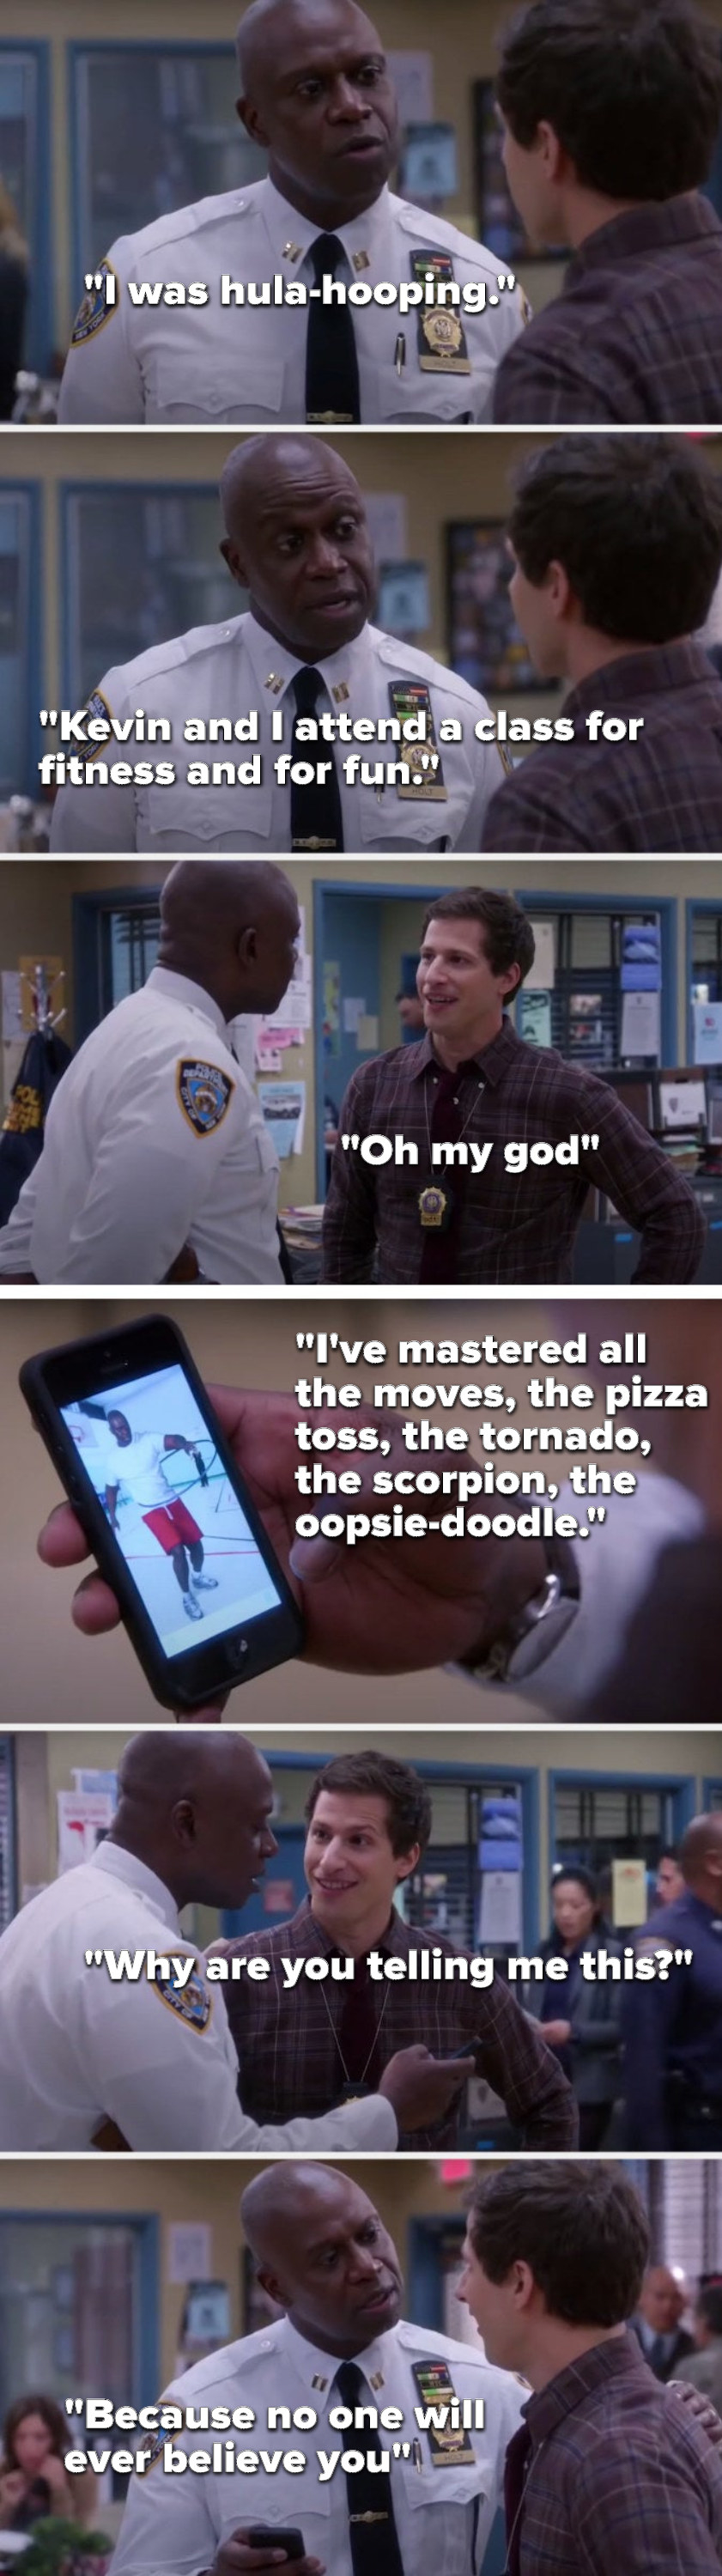 Holt says, &quot;I was hula-hooping,&quot; Holt shows Jake a picture and says, &quot;I&#x27;ve mastered all the moves, the pizza toss, the tornado, the scorpion, the oopsie-doodle,&quot; Jake says, &quot;Why are you telling me this,&quot; and Holt says, &quot;No one will ever believe you&quot;